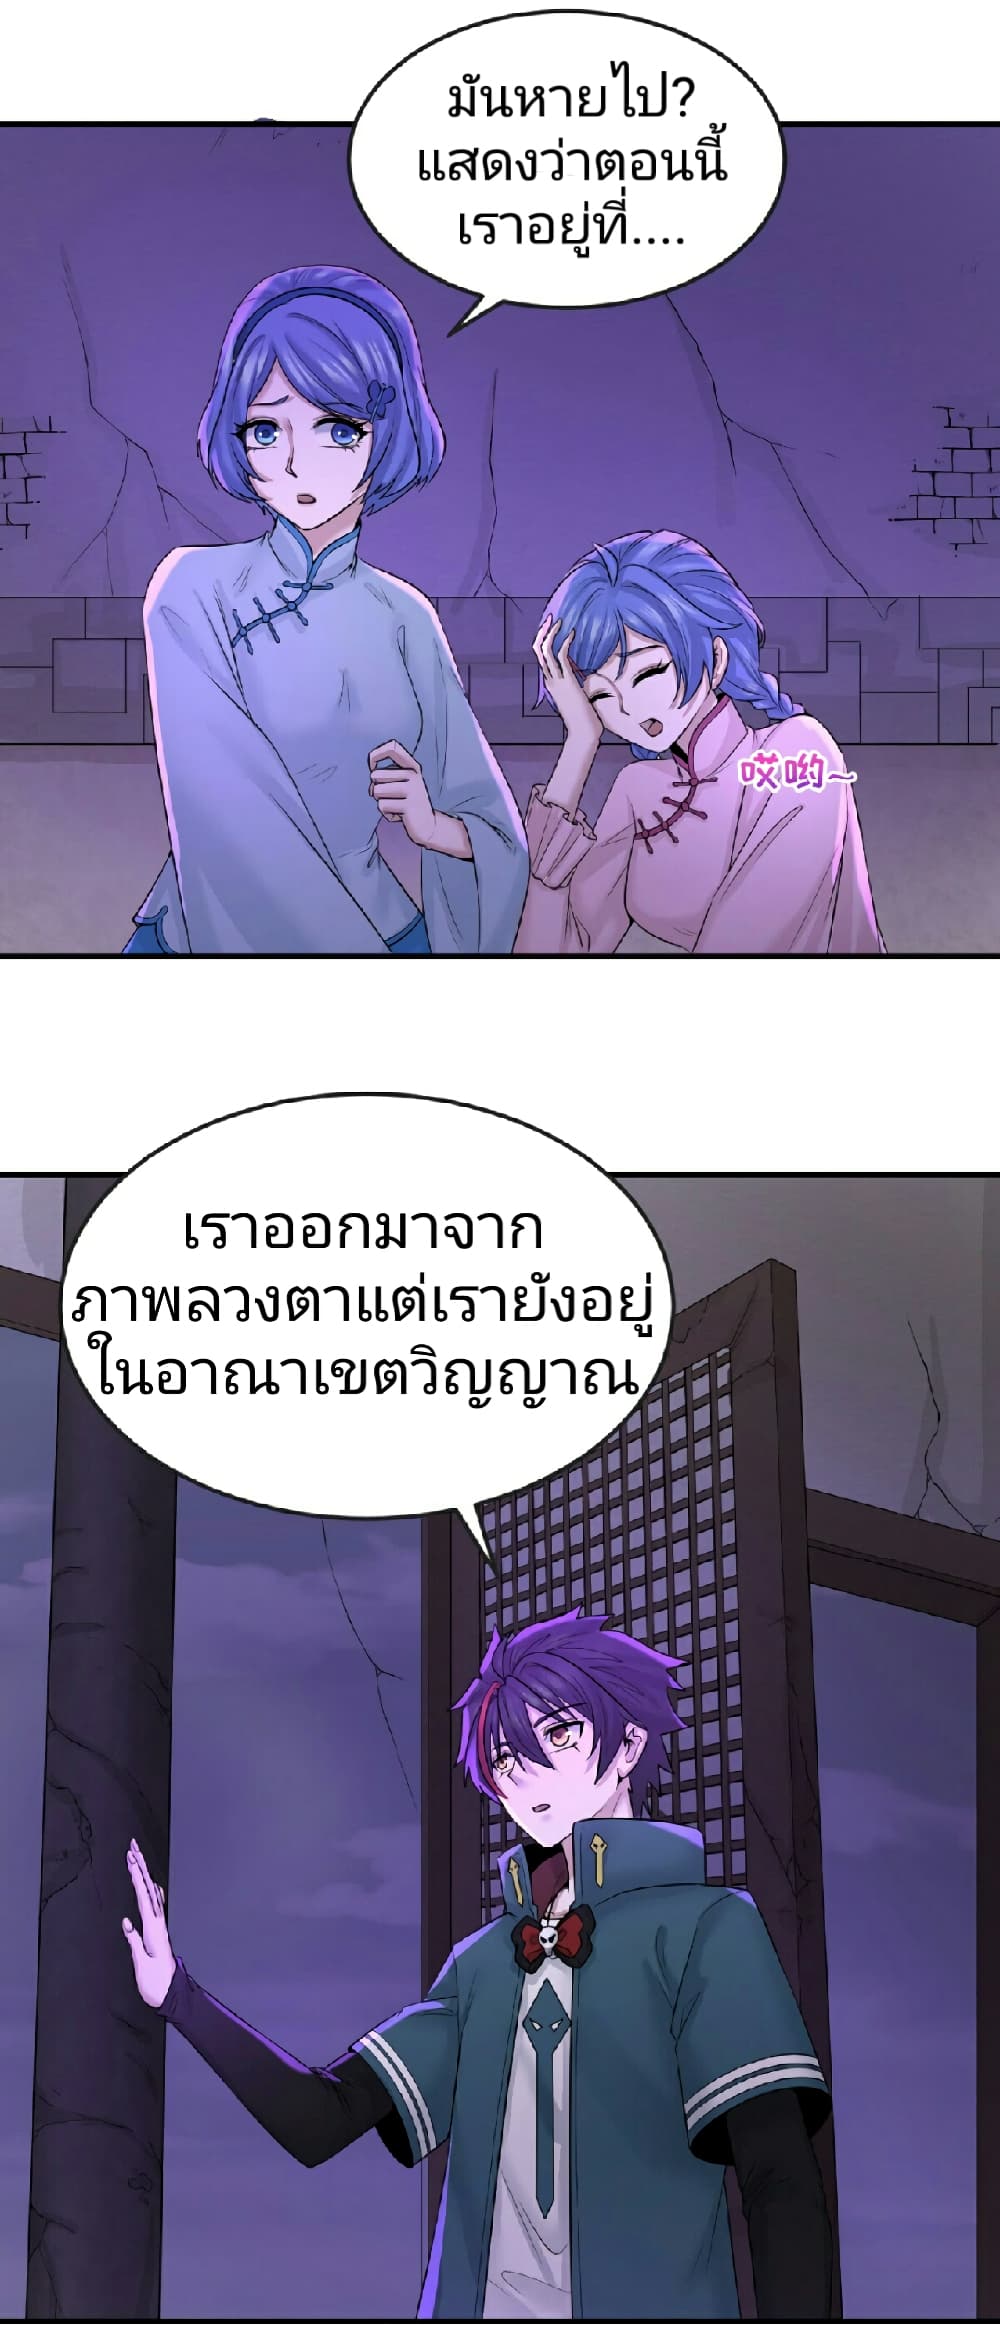 The Age of Ghost Spirits à¸à¸­à¸à¸à¸µà¹ 48 (6)